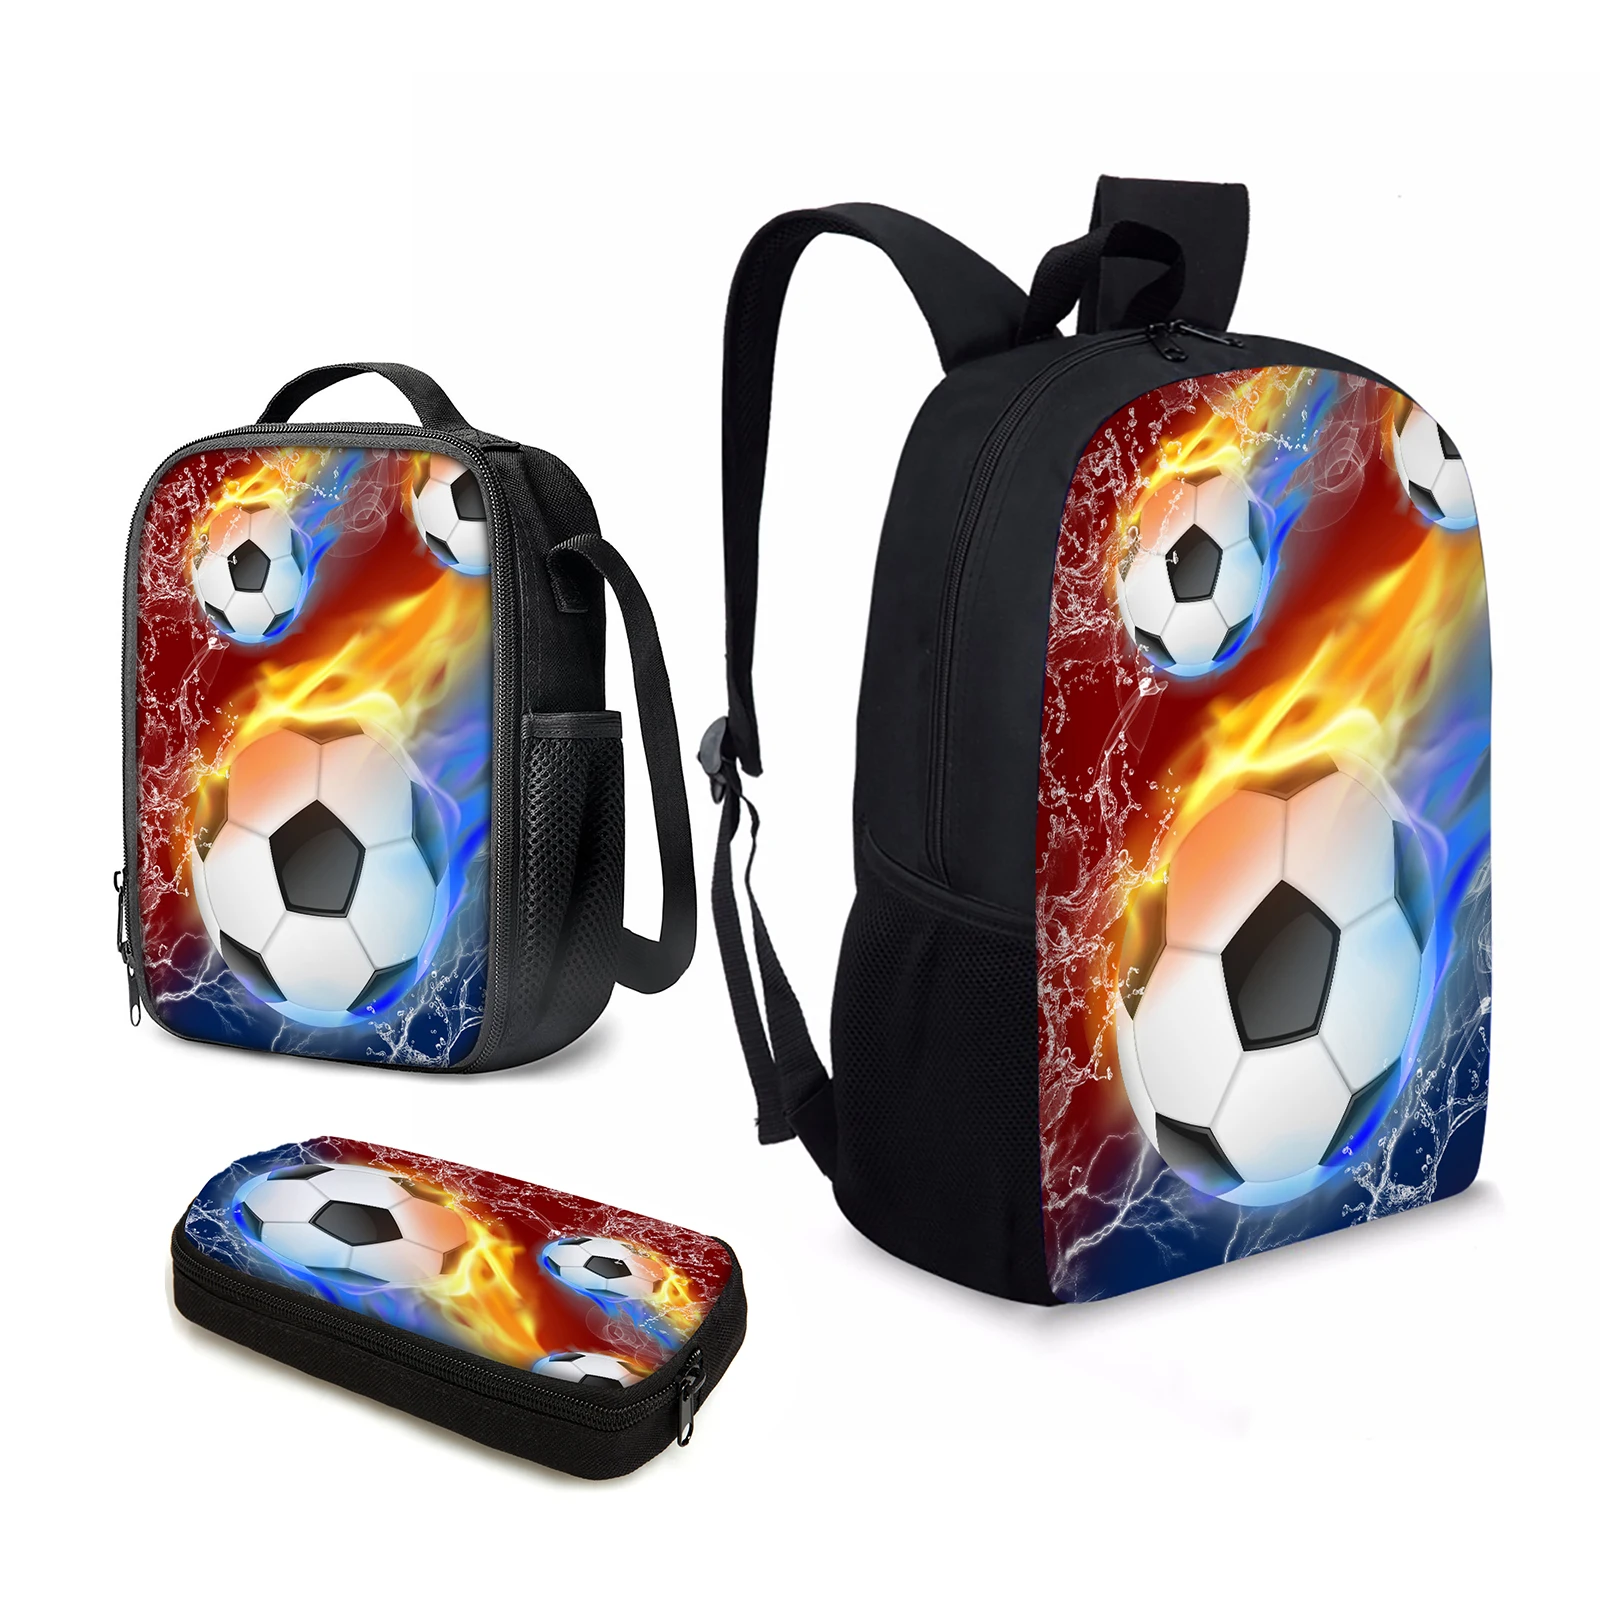 

YIKELUO Cool Football Hobby Print Children's School Bag Fashionable 3PCS Back To School Gifts For Students Lunch Bag/knapsack